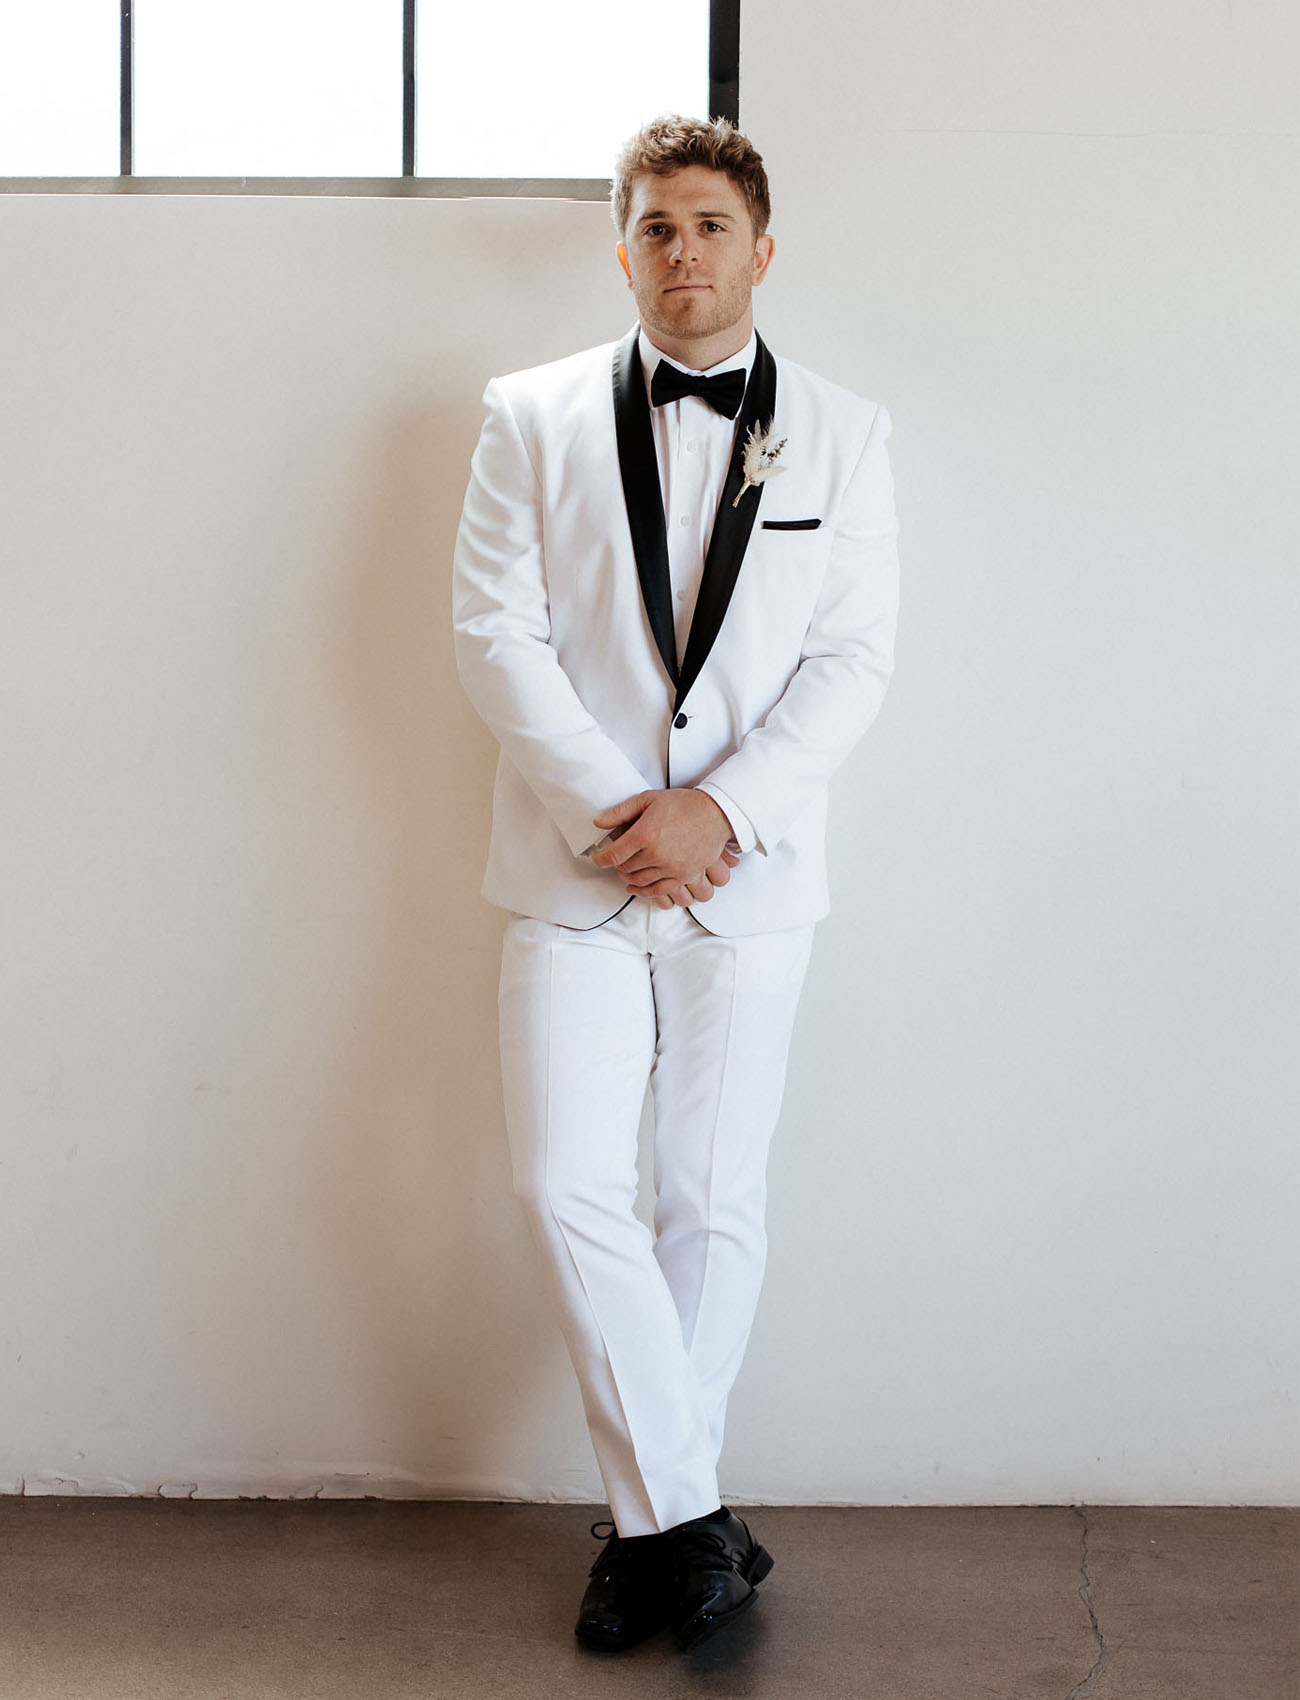 The groom was wearing a white tux with black lapels